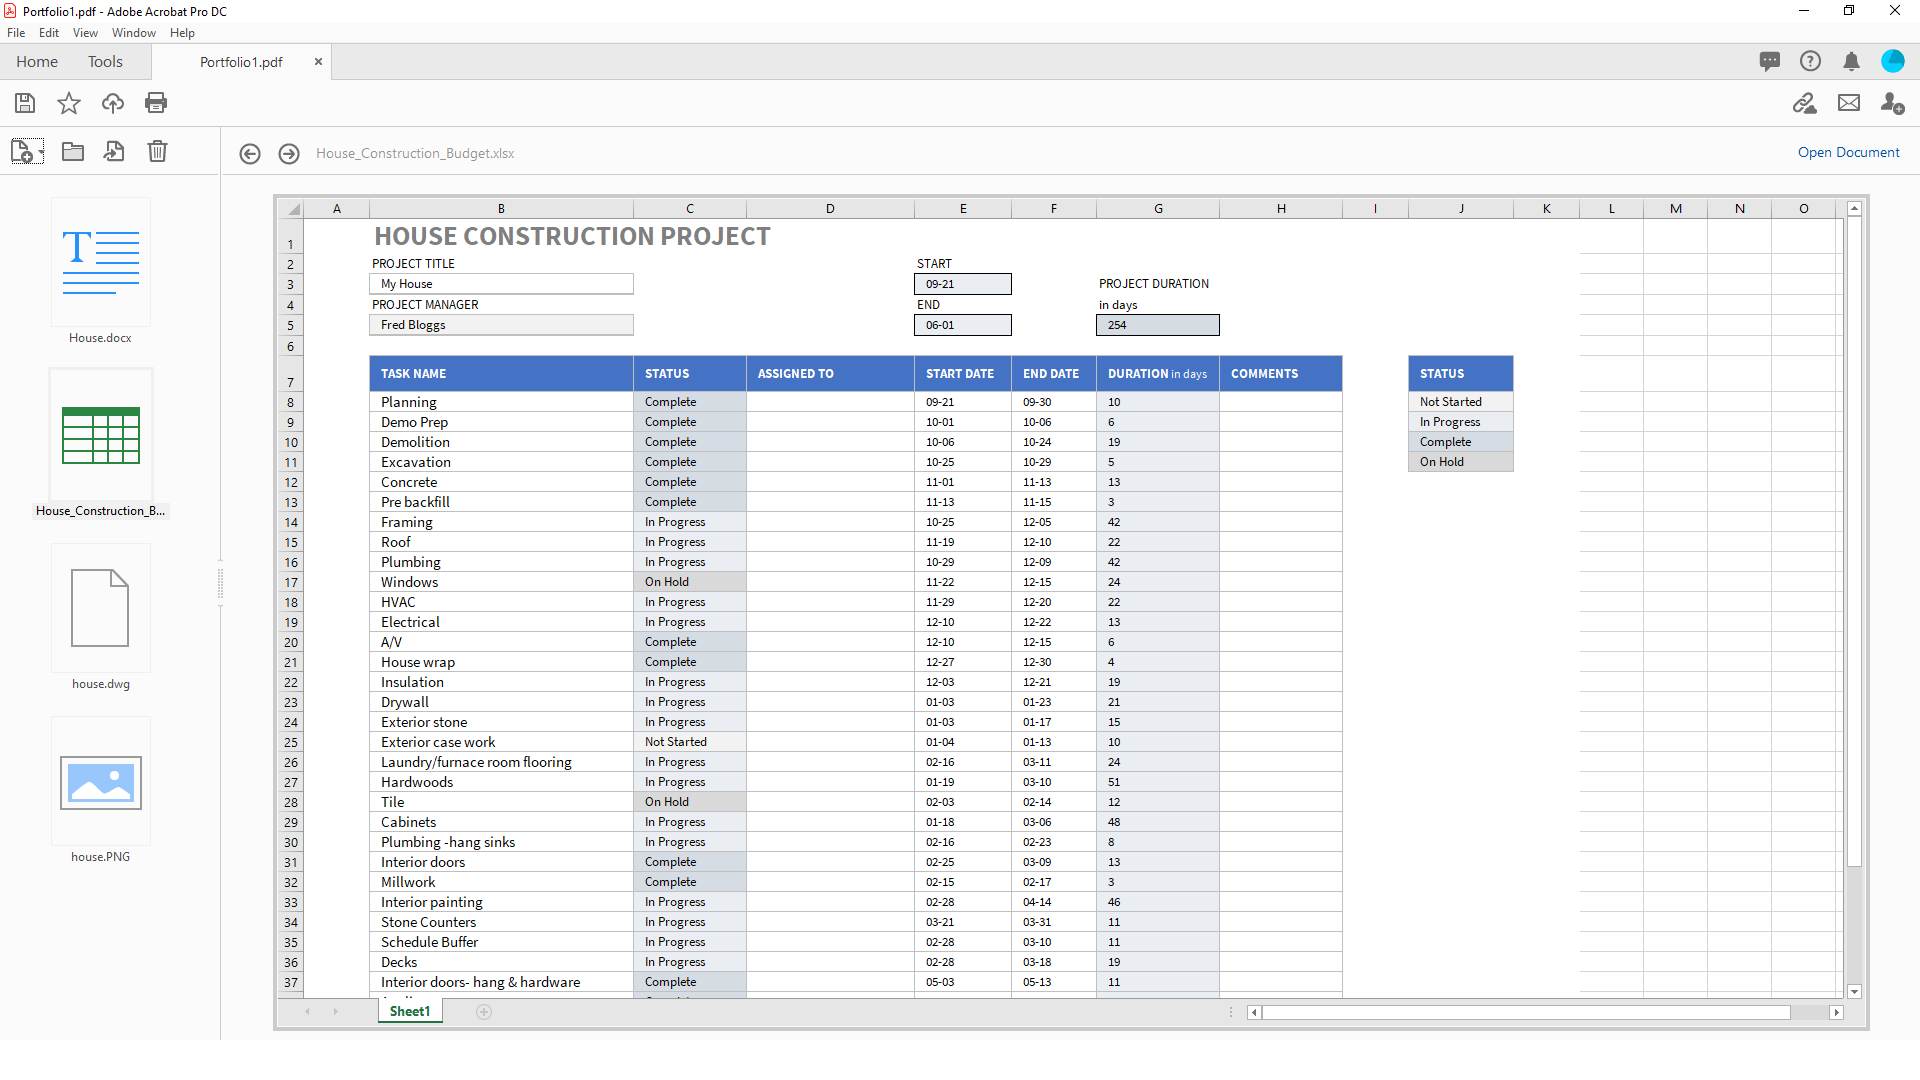 An image showing a spreadsheet contained within a PDF Portfolio